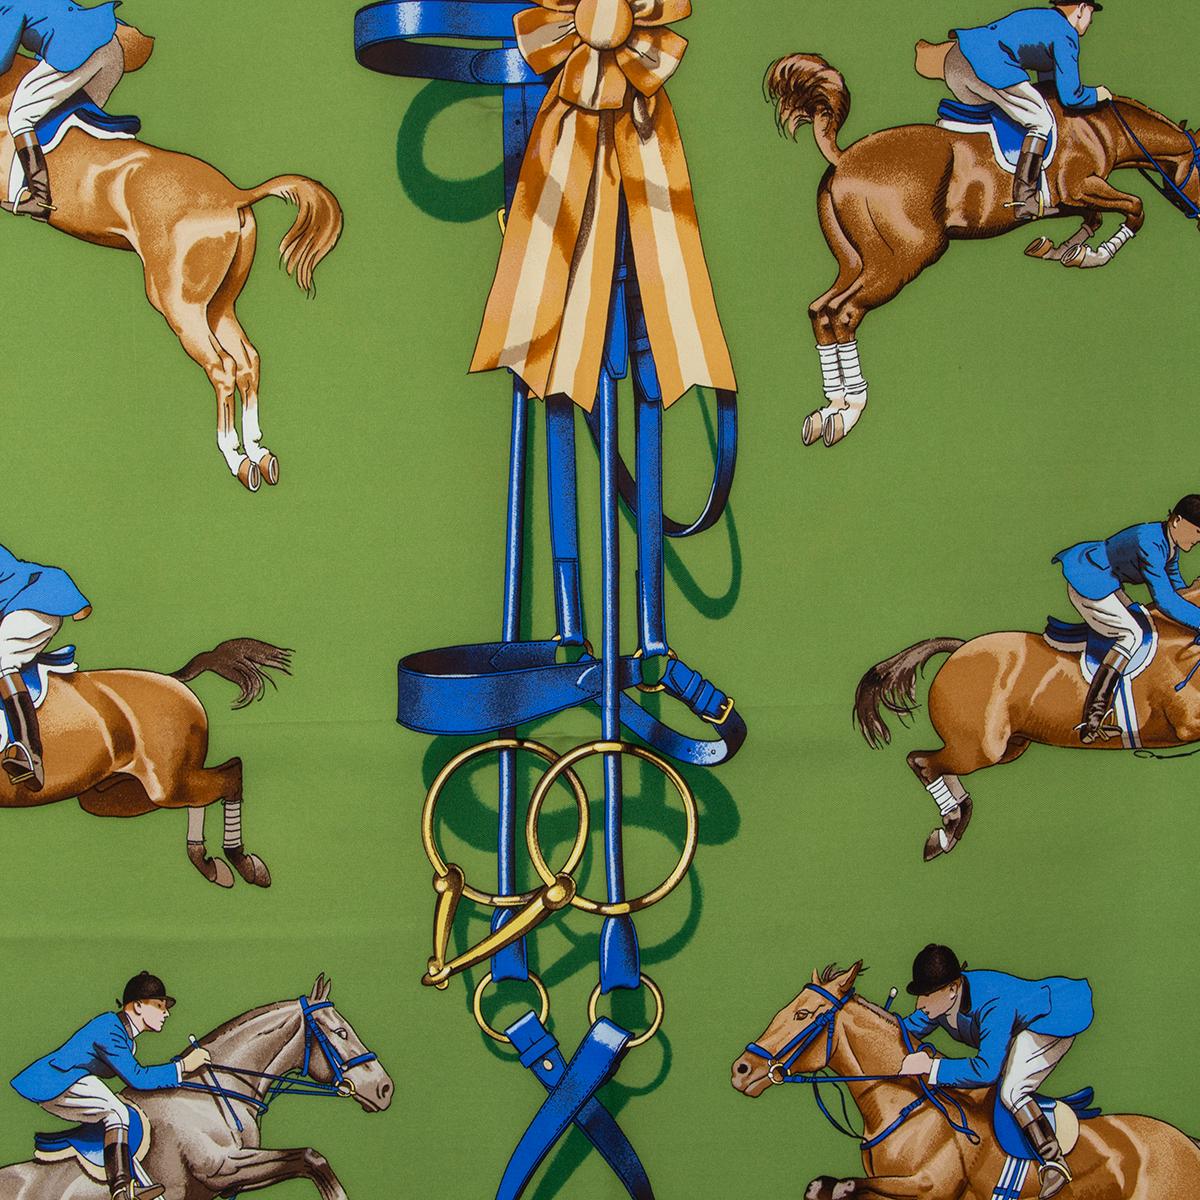 Hermès 'Jumping 90' scarf by Philippe Ledoux in apple green silk with details in chartreuse, light beige, paprika, beige, brown, taupe, blue and yellow. Has been worn and is in excellent condition.

Width 90cm (35.1in)
Height 90cm (35.1in)